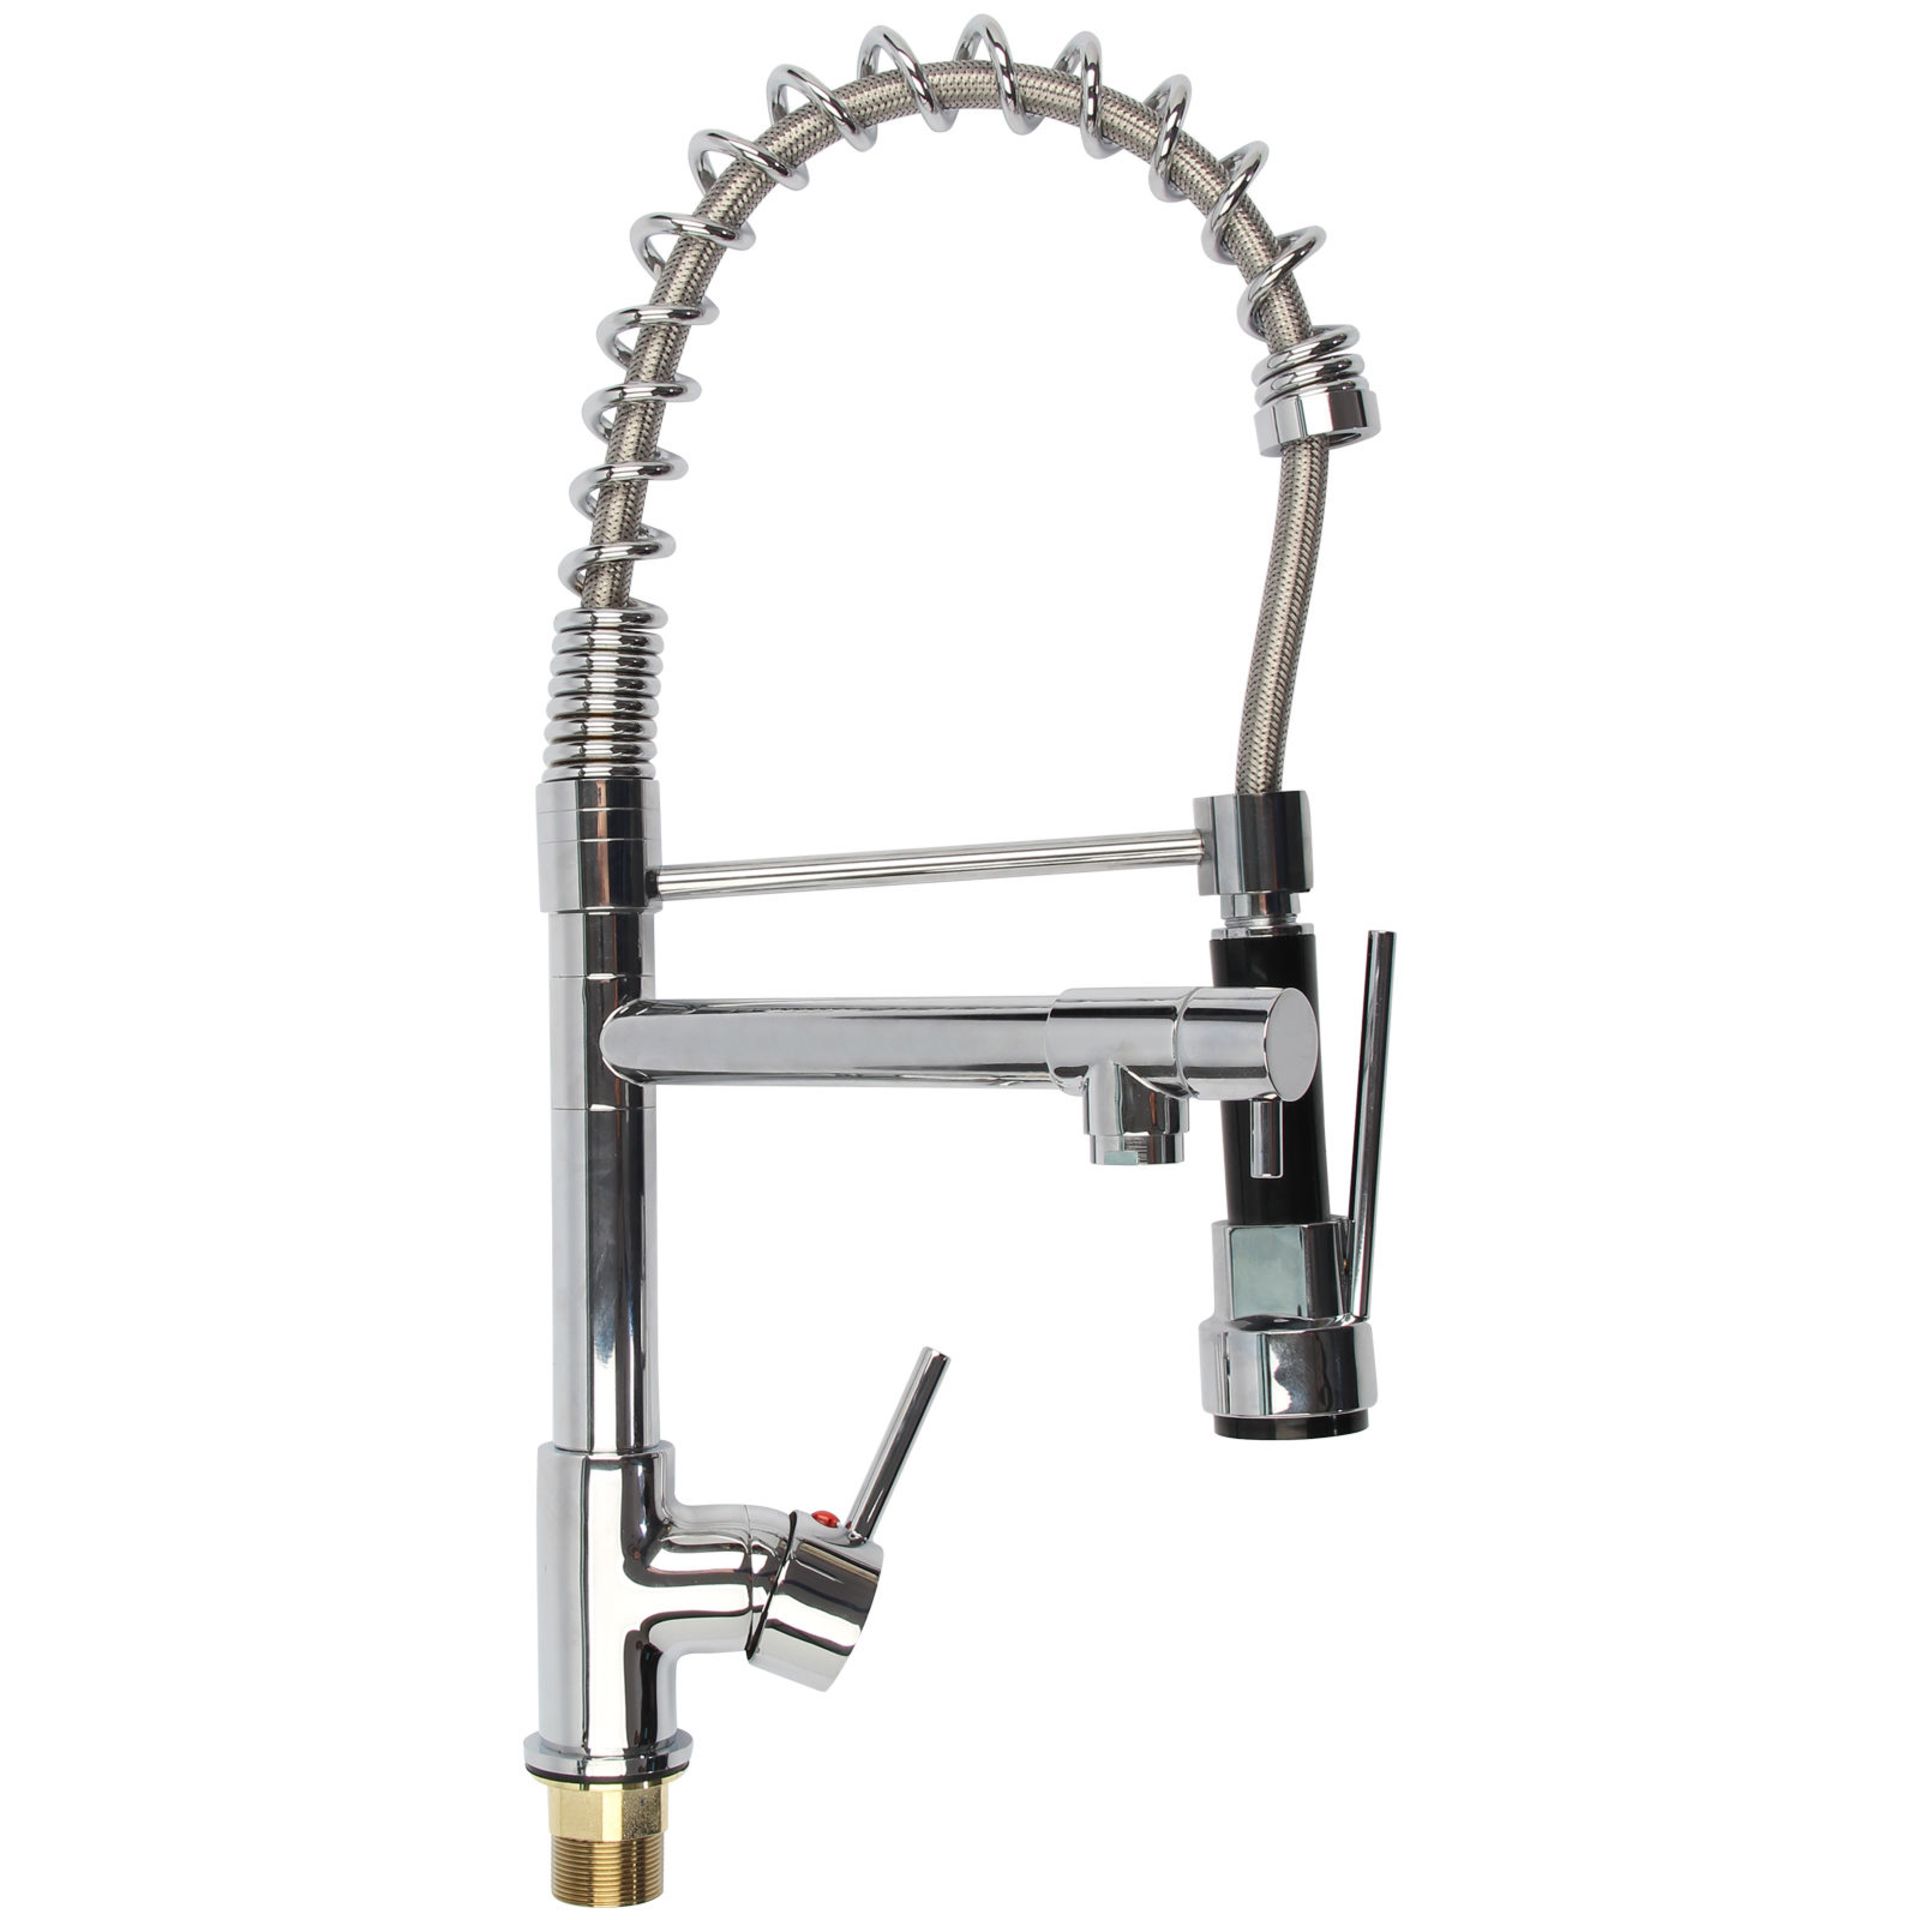 Bentley Modern Monobloc Chrome Brass Pull Out Spray Mixer Tap. RRP £349.99. This tap is from our - Image 4 of 4